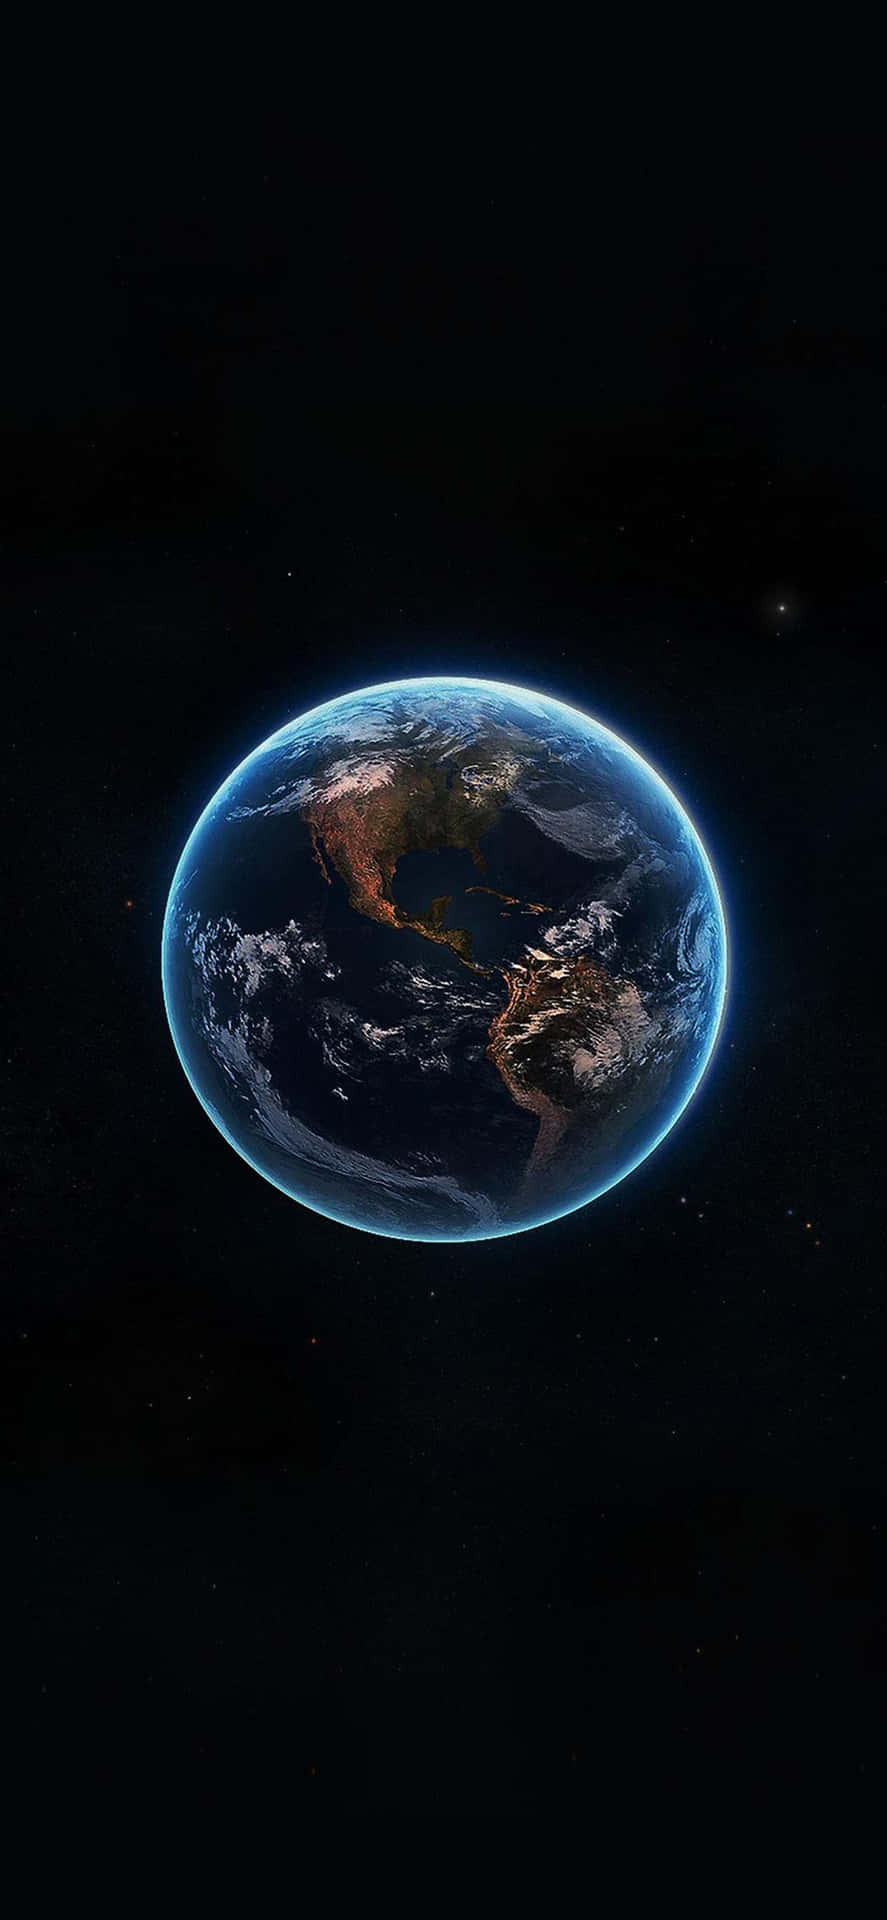 A bird's eye view of the Earth viewed from an Iphone. Wallpaper